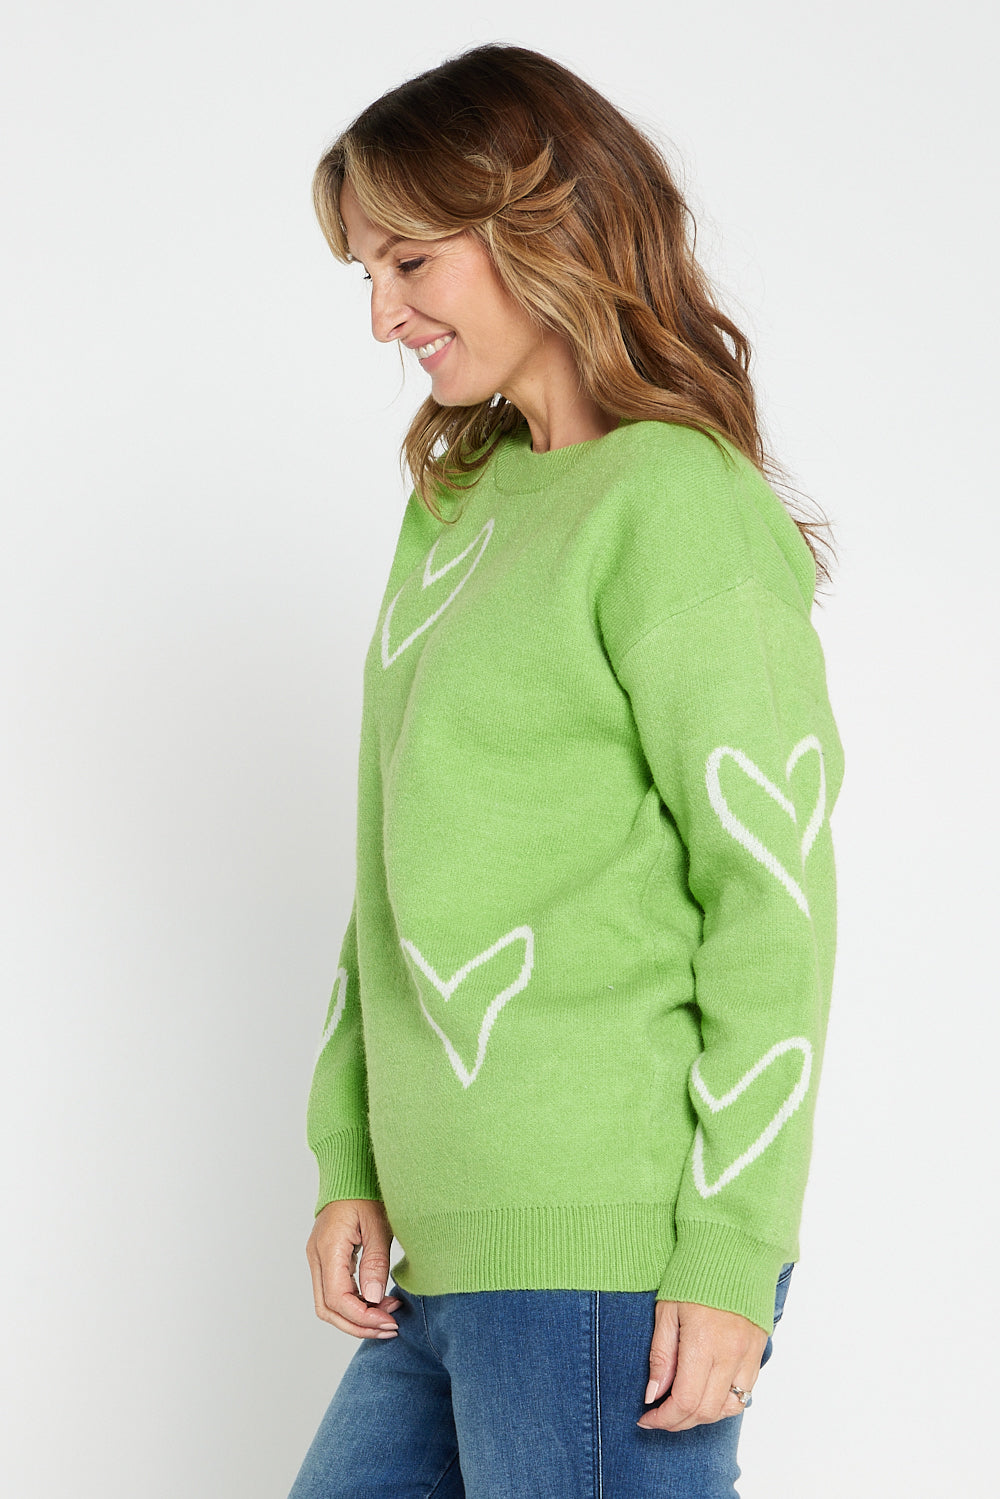 Cleo Knit Jumper - Lime Heart